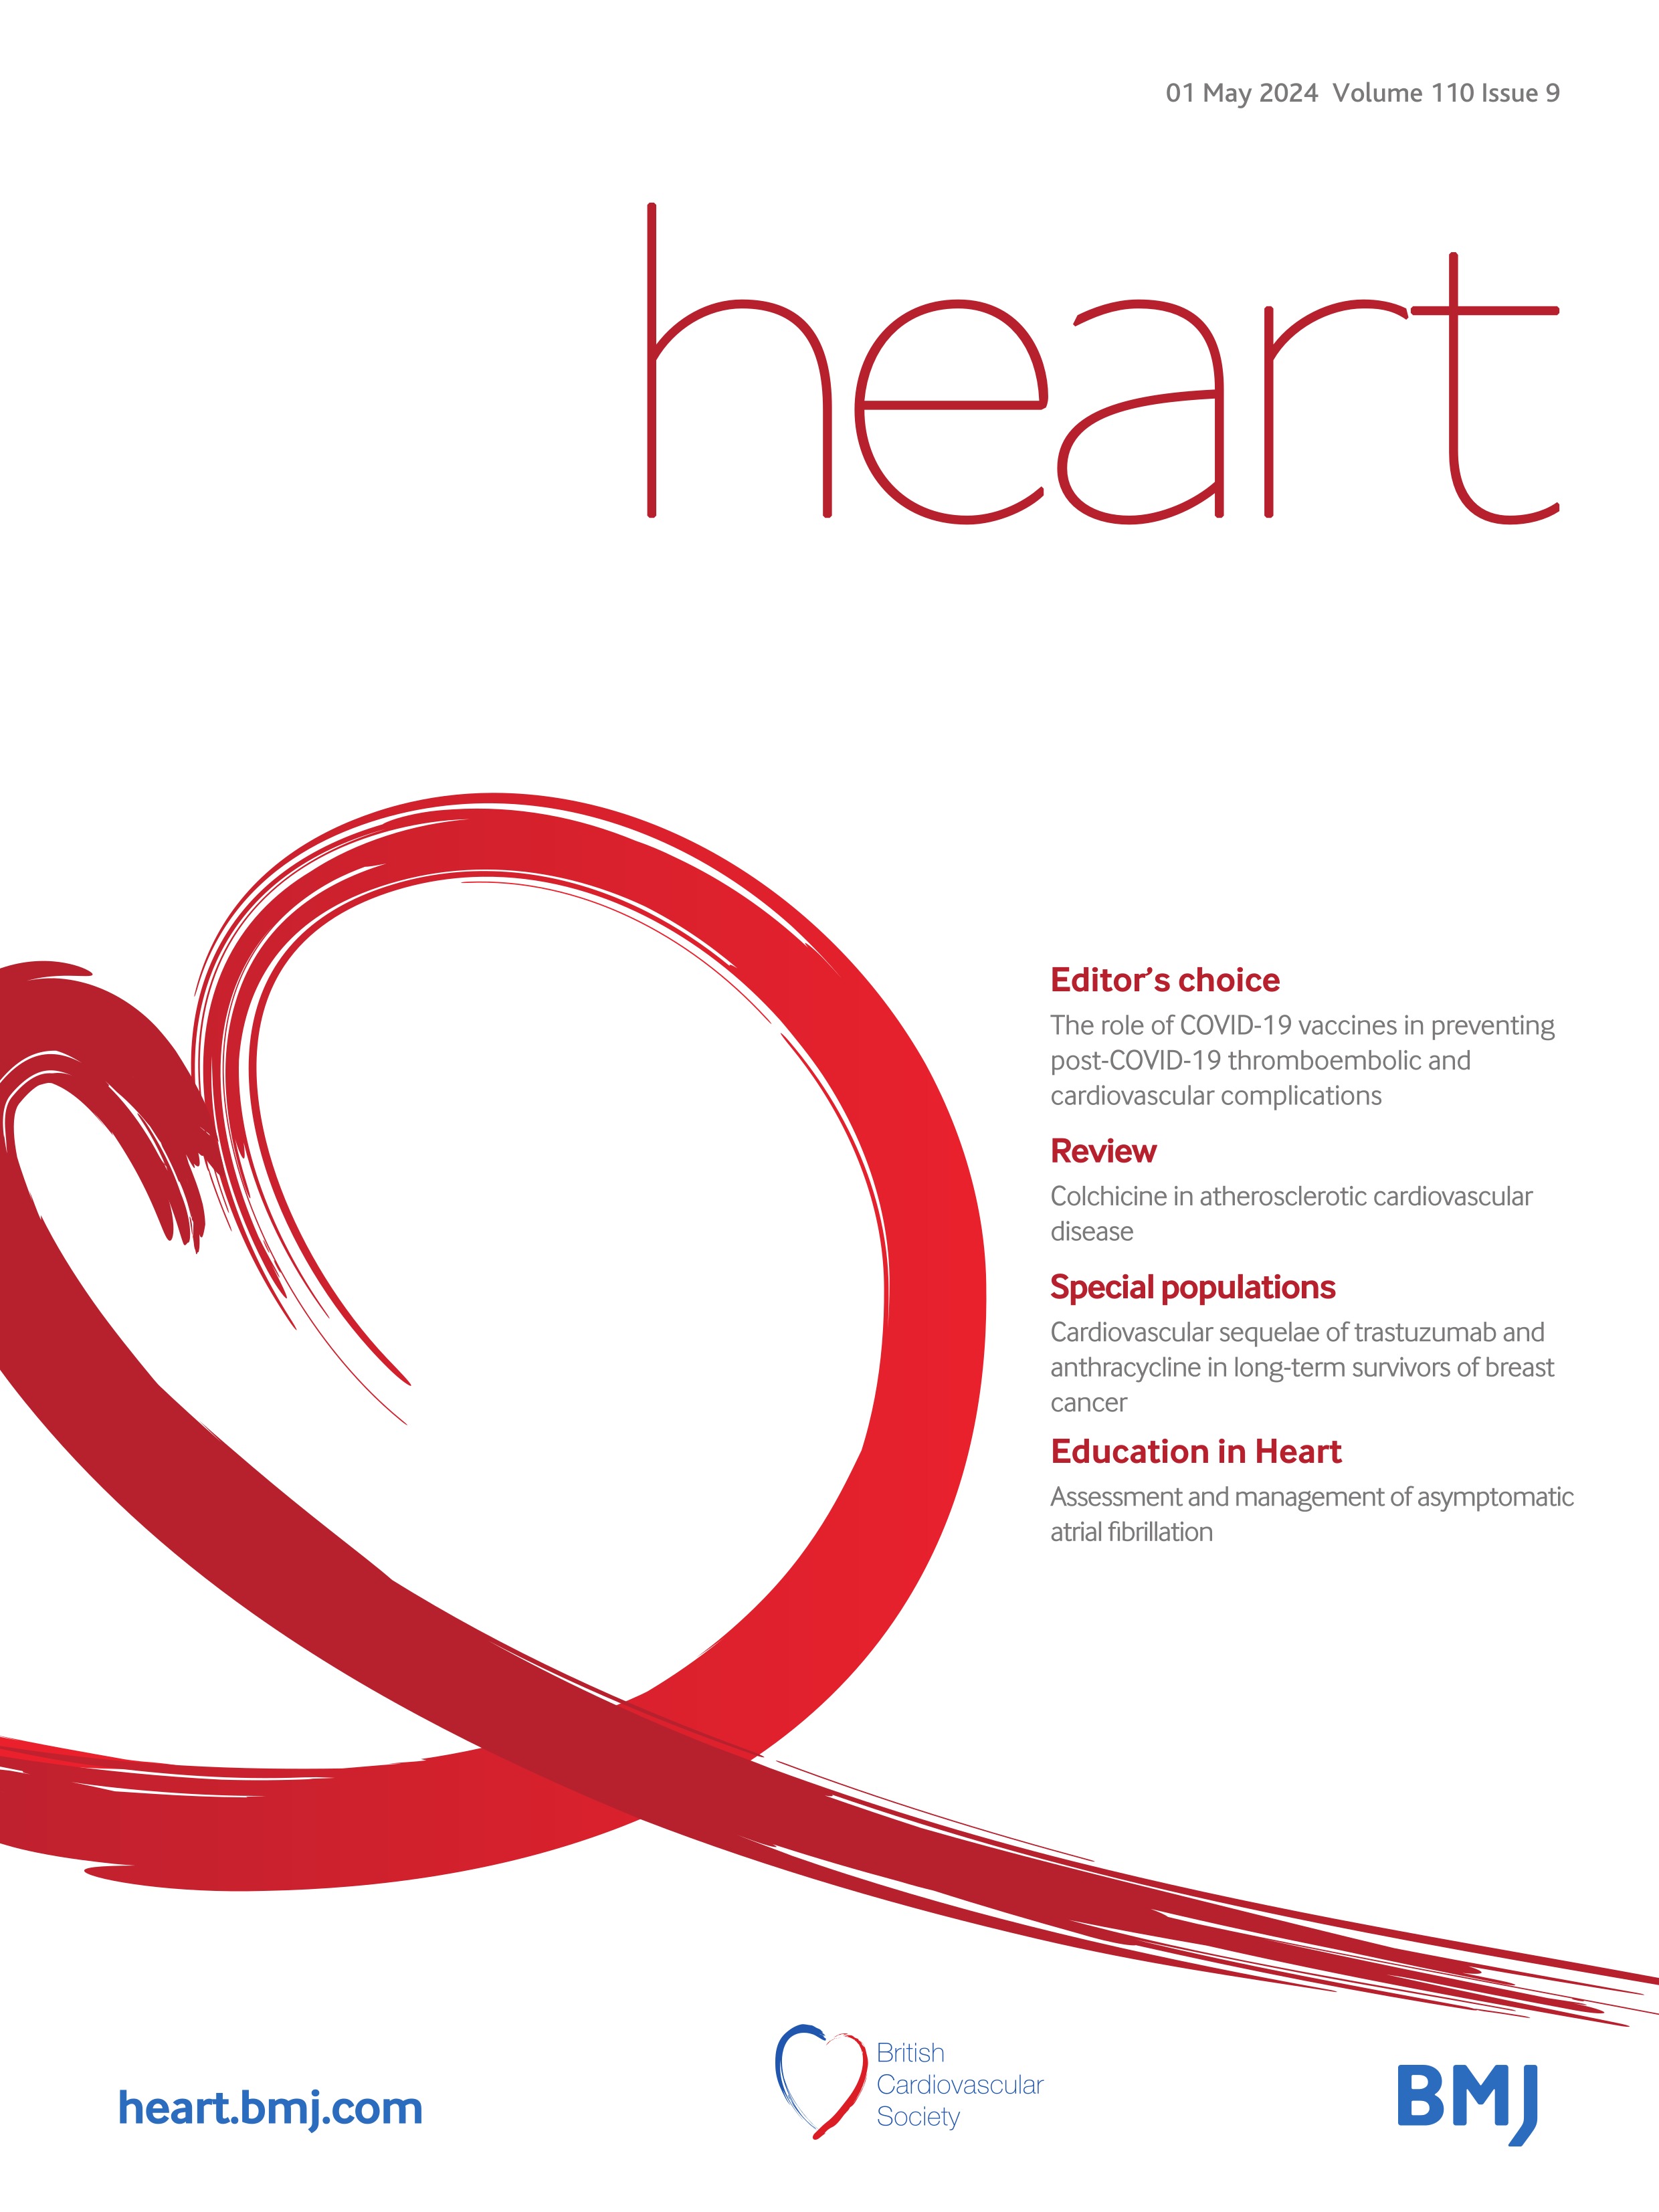 Interaction of genetic risk and lifestyle on the incidence of atrial fibrillation